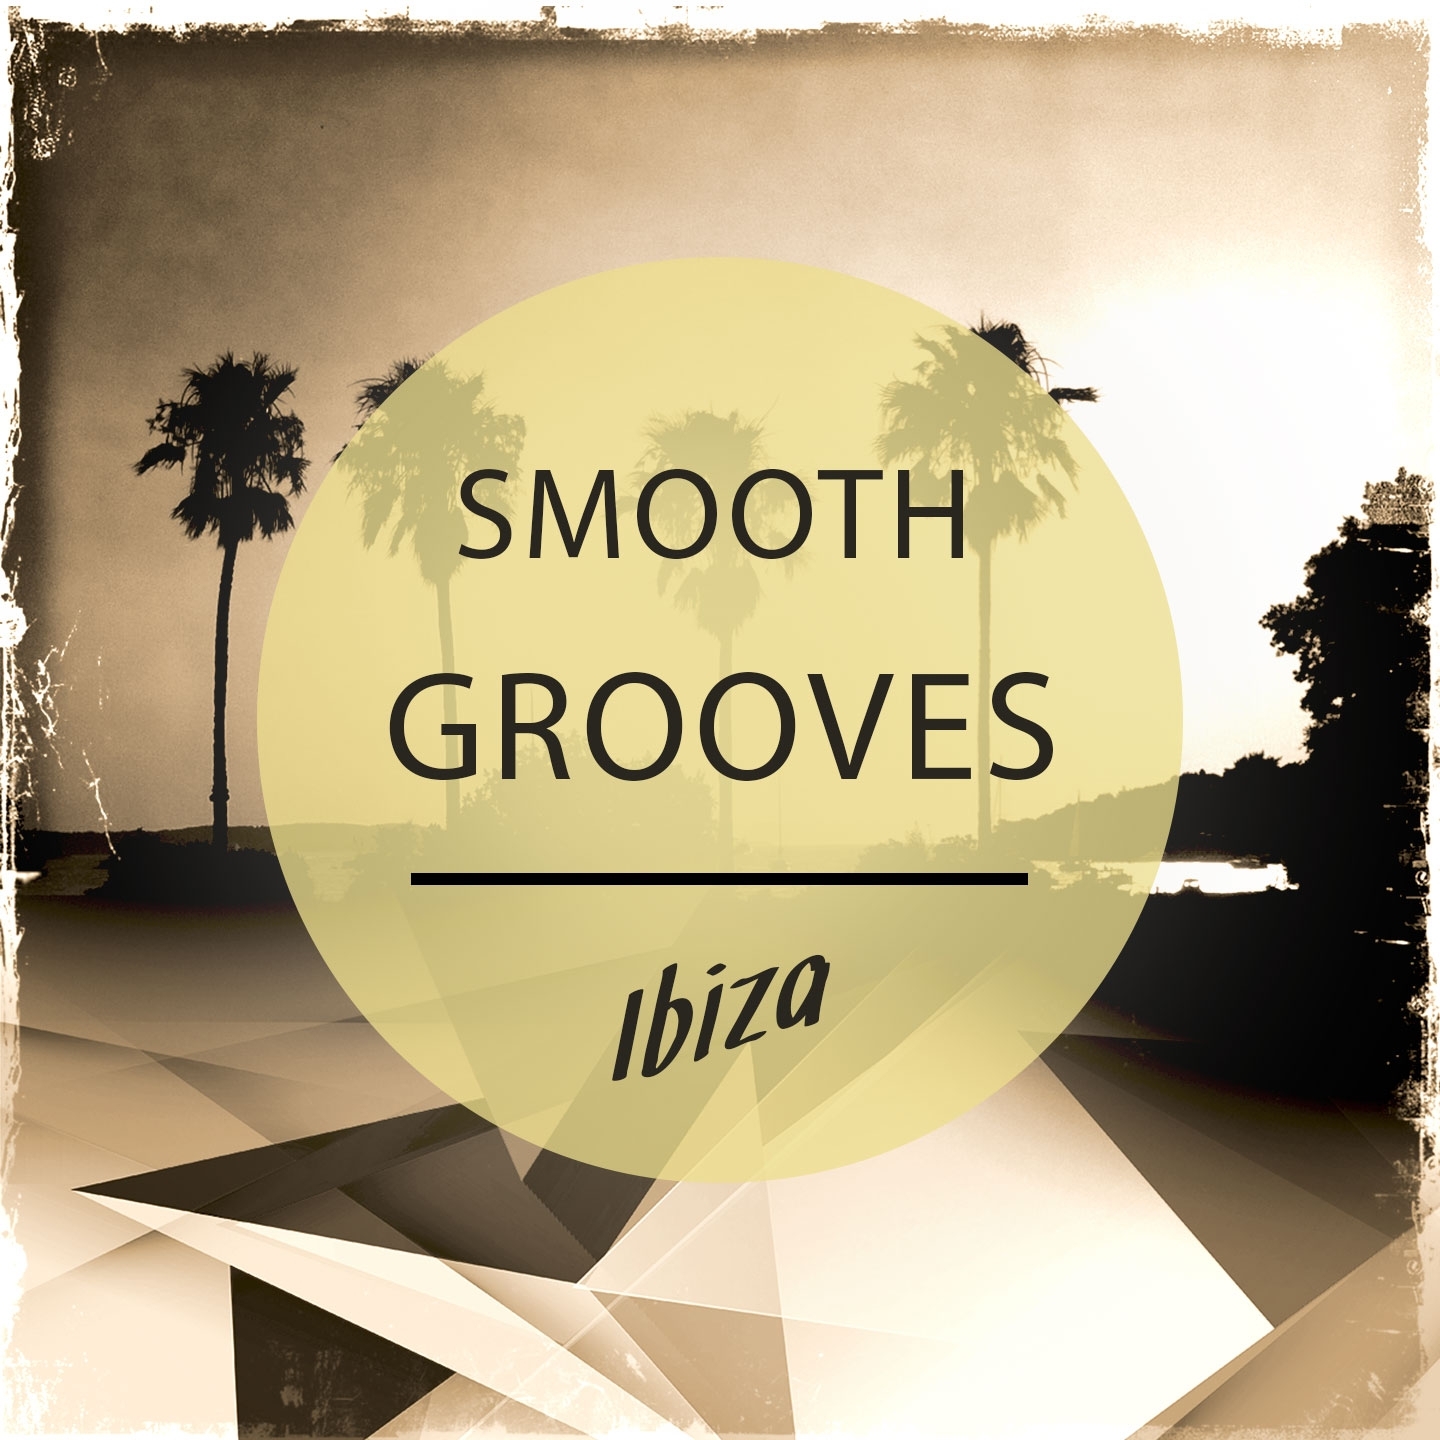 Smooth Grooves - Ibiza, Vol. 1 (Chilling White Isle House & Lounge Tunes)